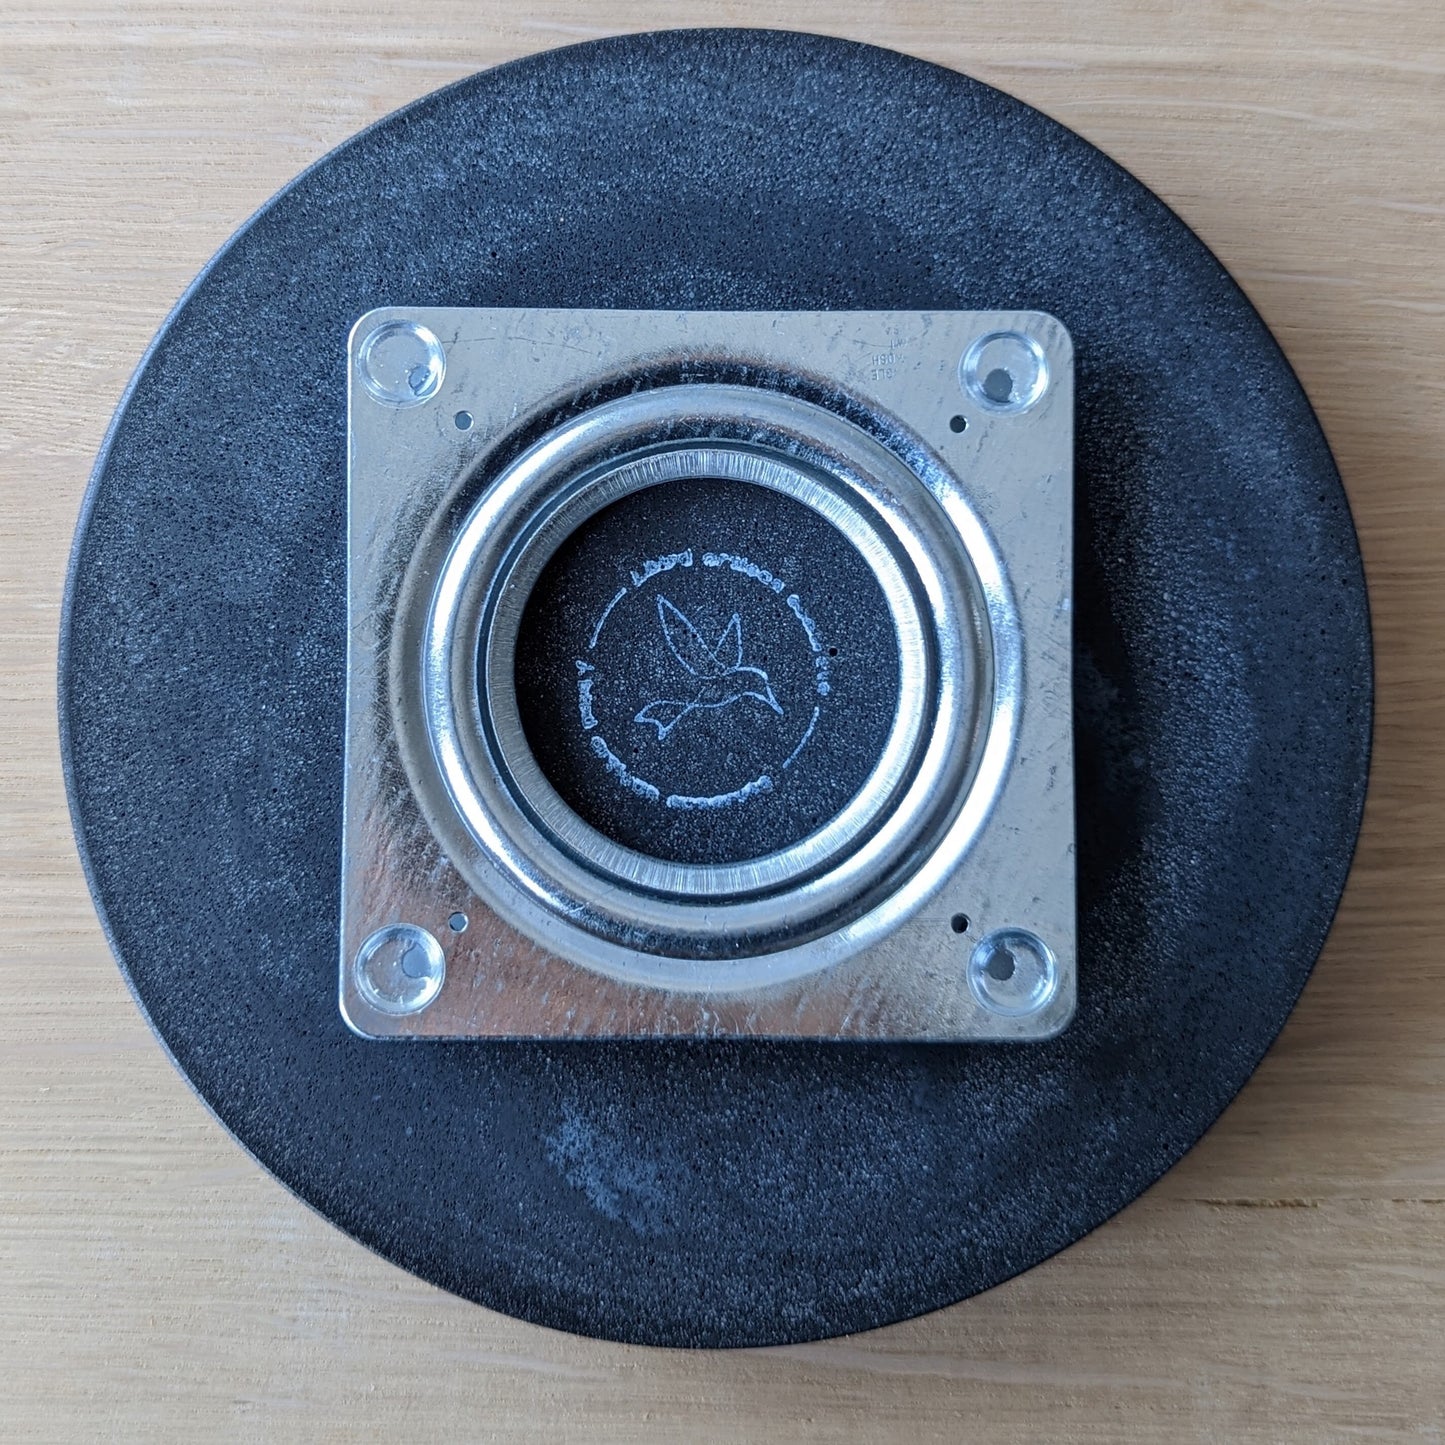 7.5" Small Concrete Lazy Susan Turntable